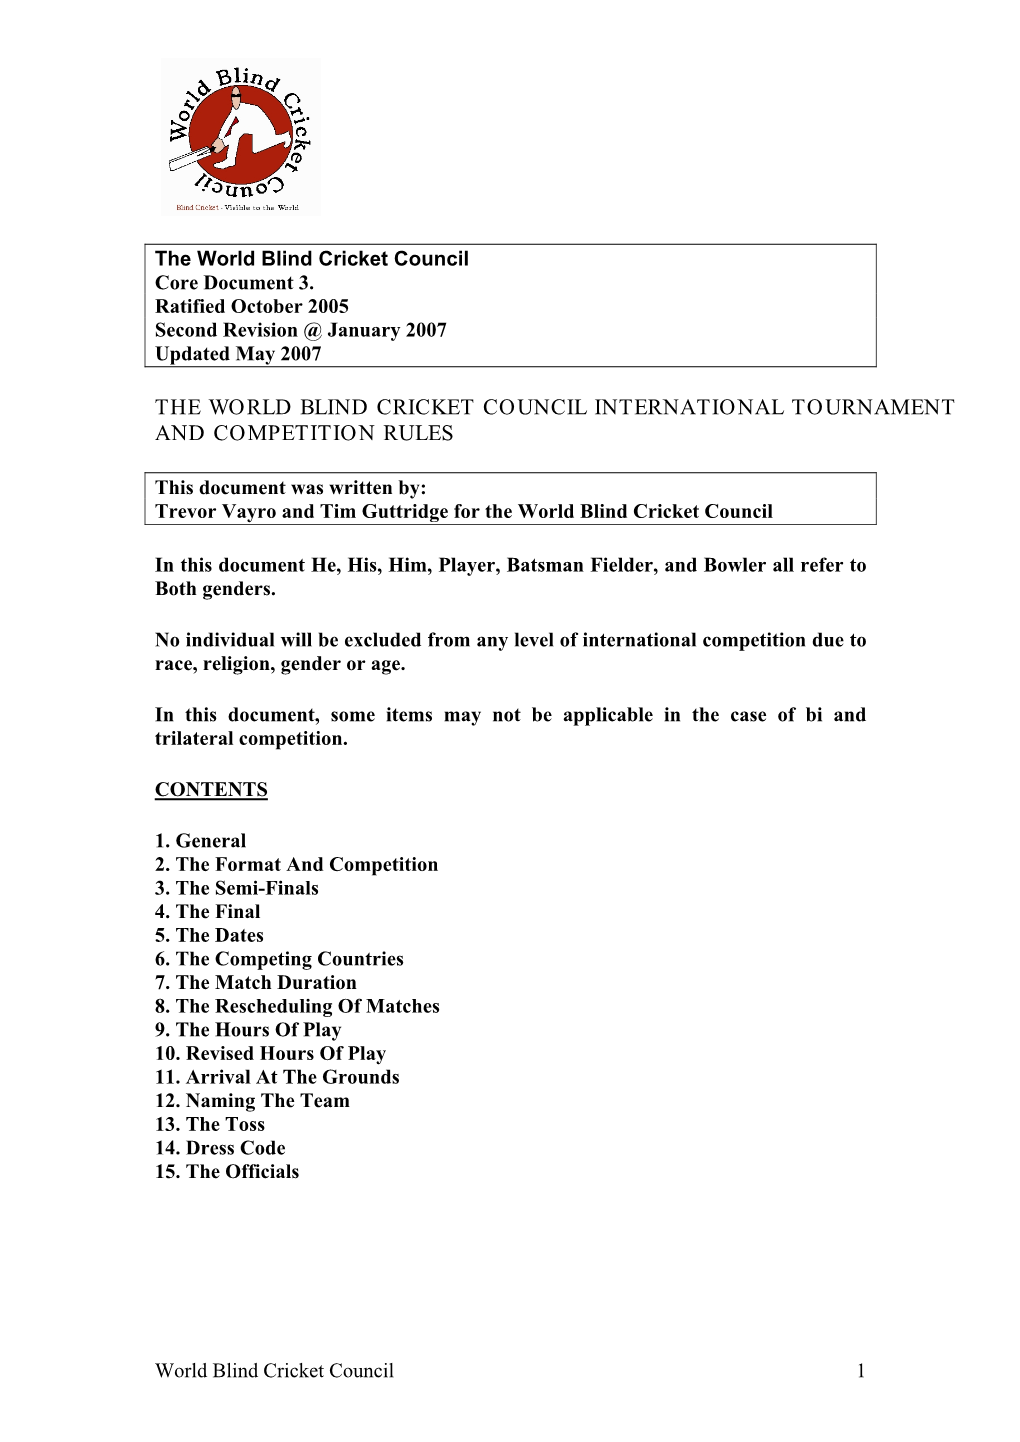 The World Blind Cricket Council International Tournament and Competition Rules